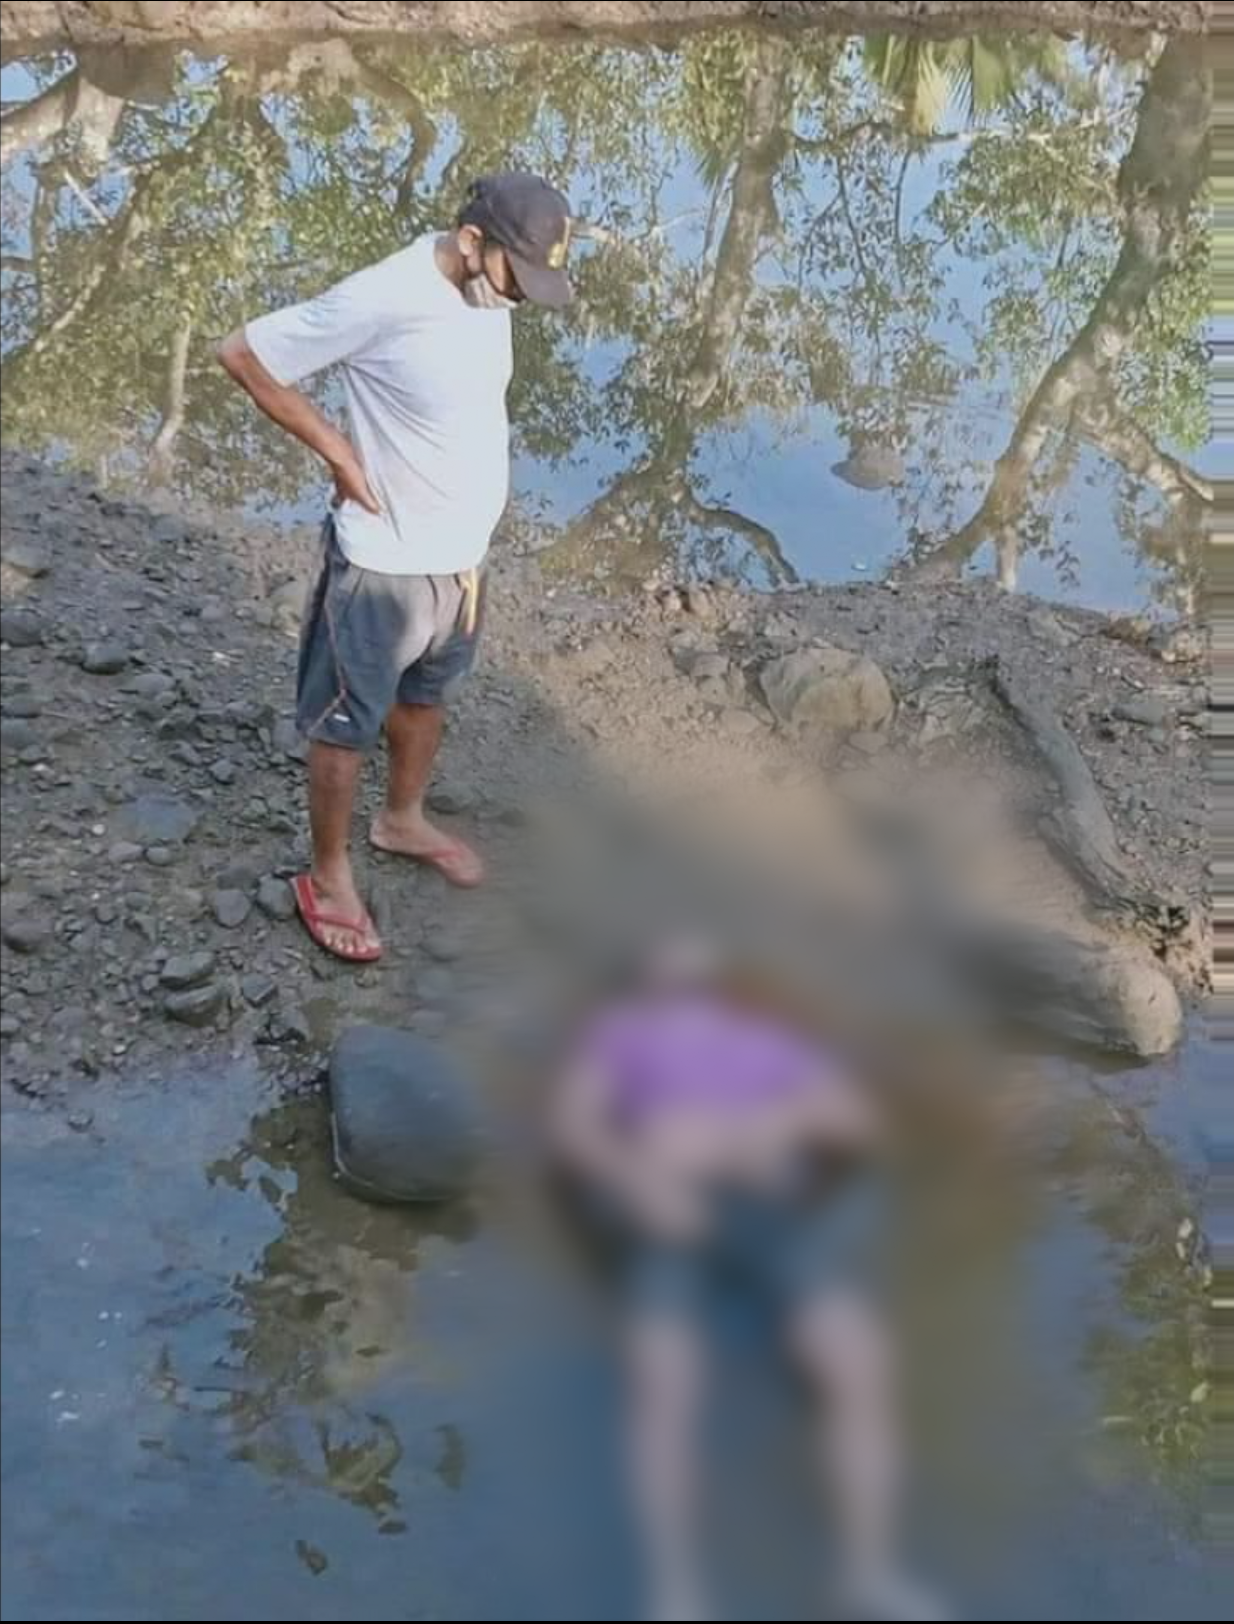 The body of Edmund Supilanos, 28, was found in a river in Clarin, a town in Bohol province. PHOTO FROM CLARIN PNP